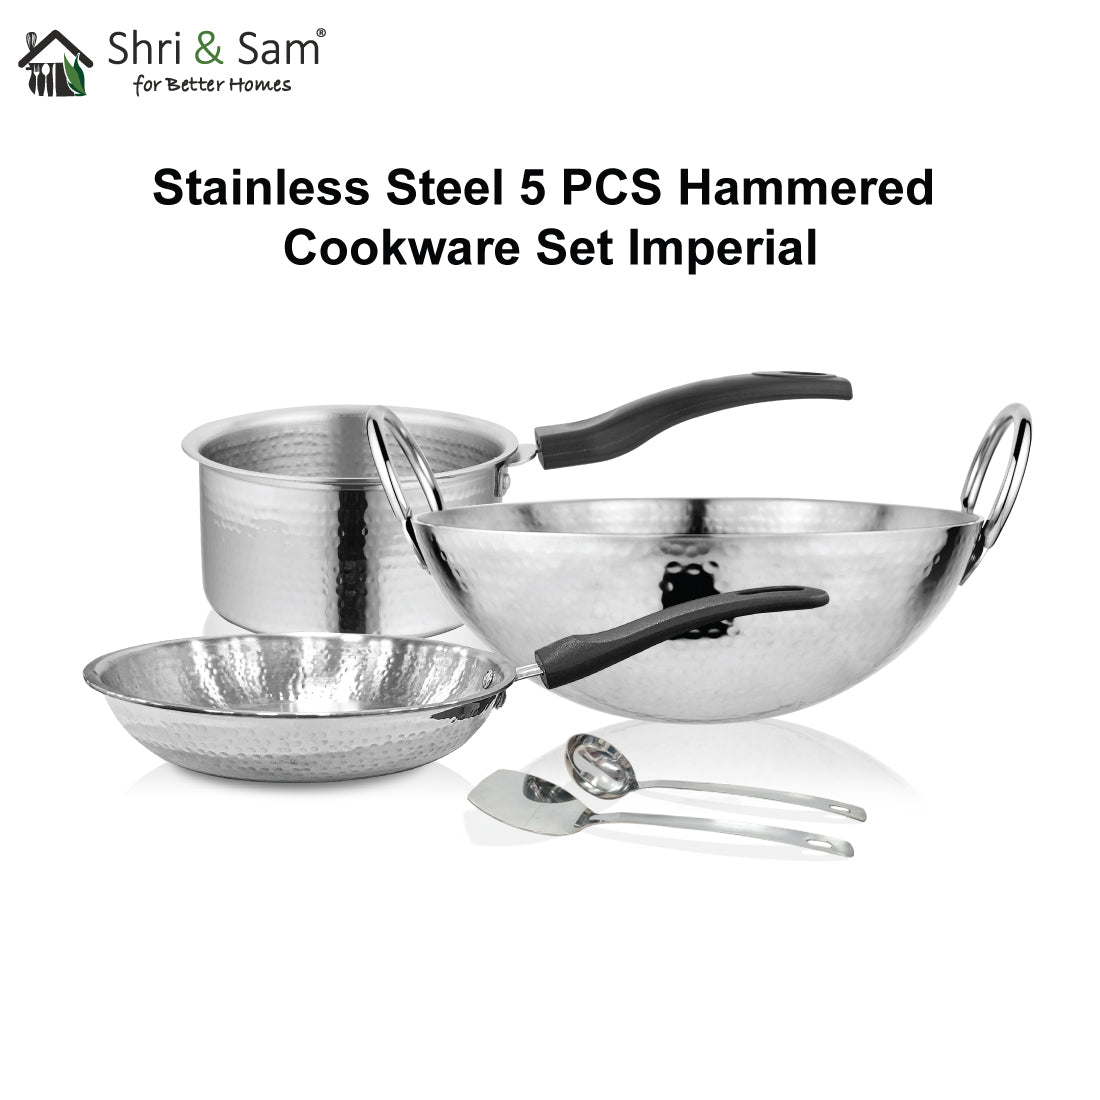 Stainless Steel 5 PCS Hammered Cookware Set Imperial